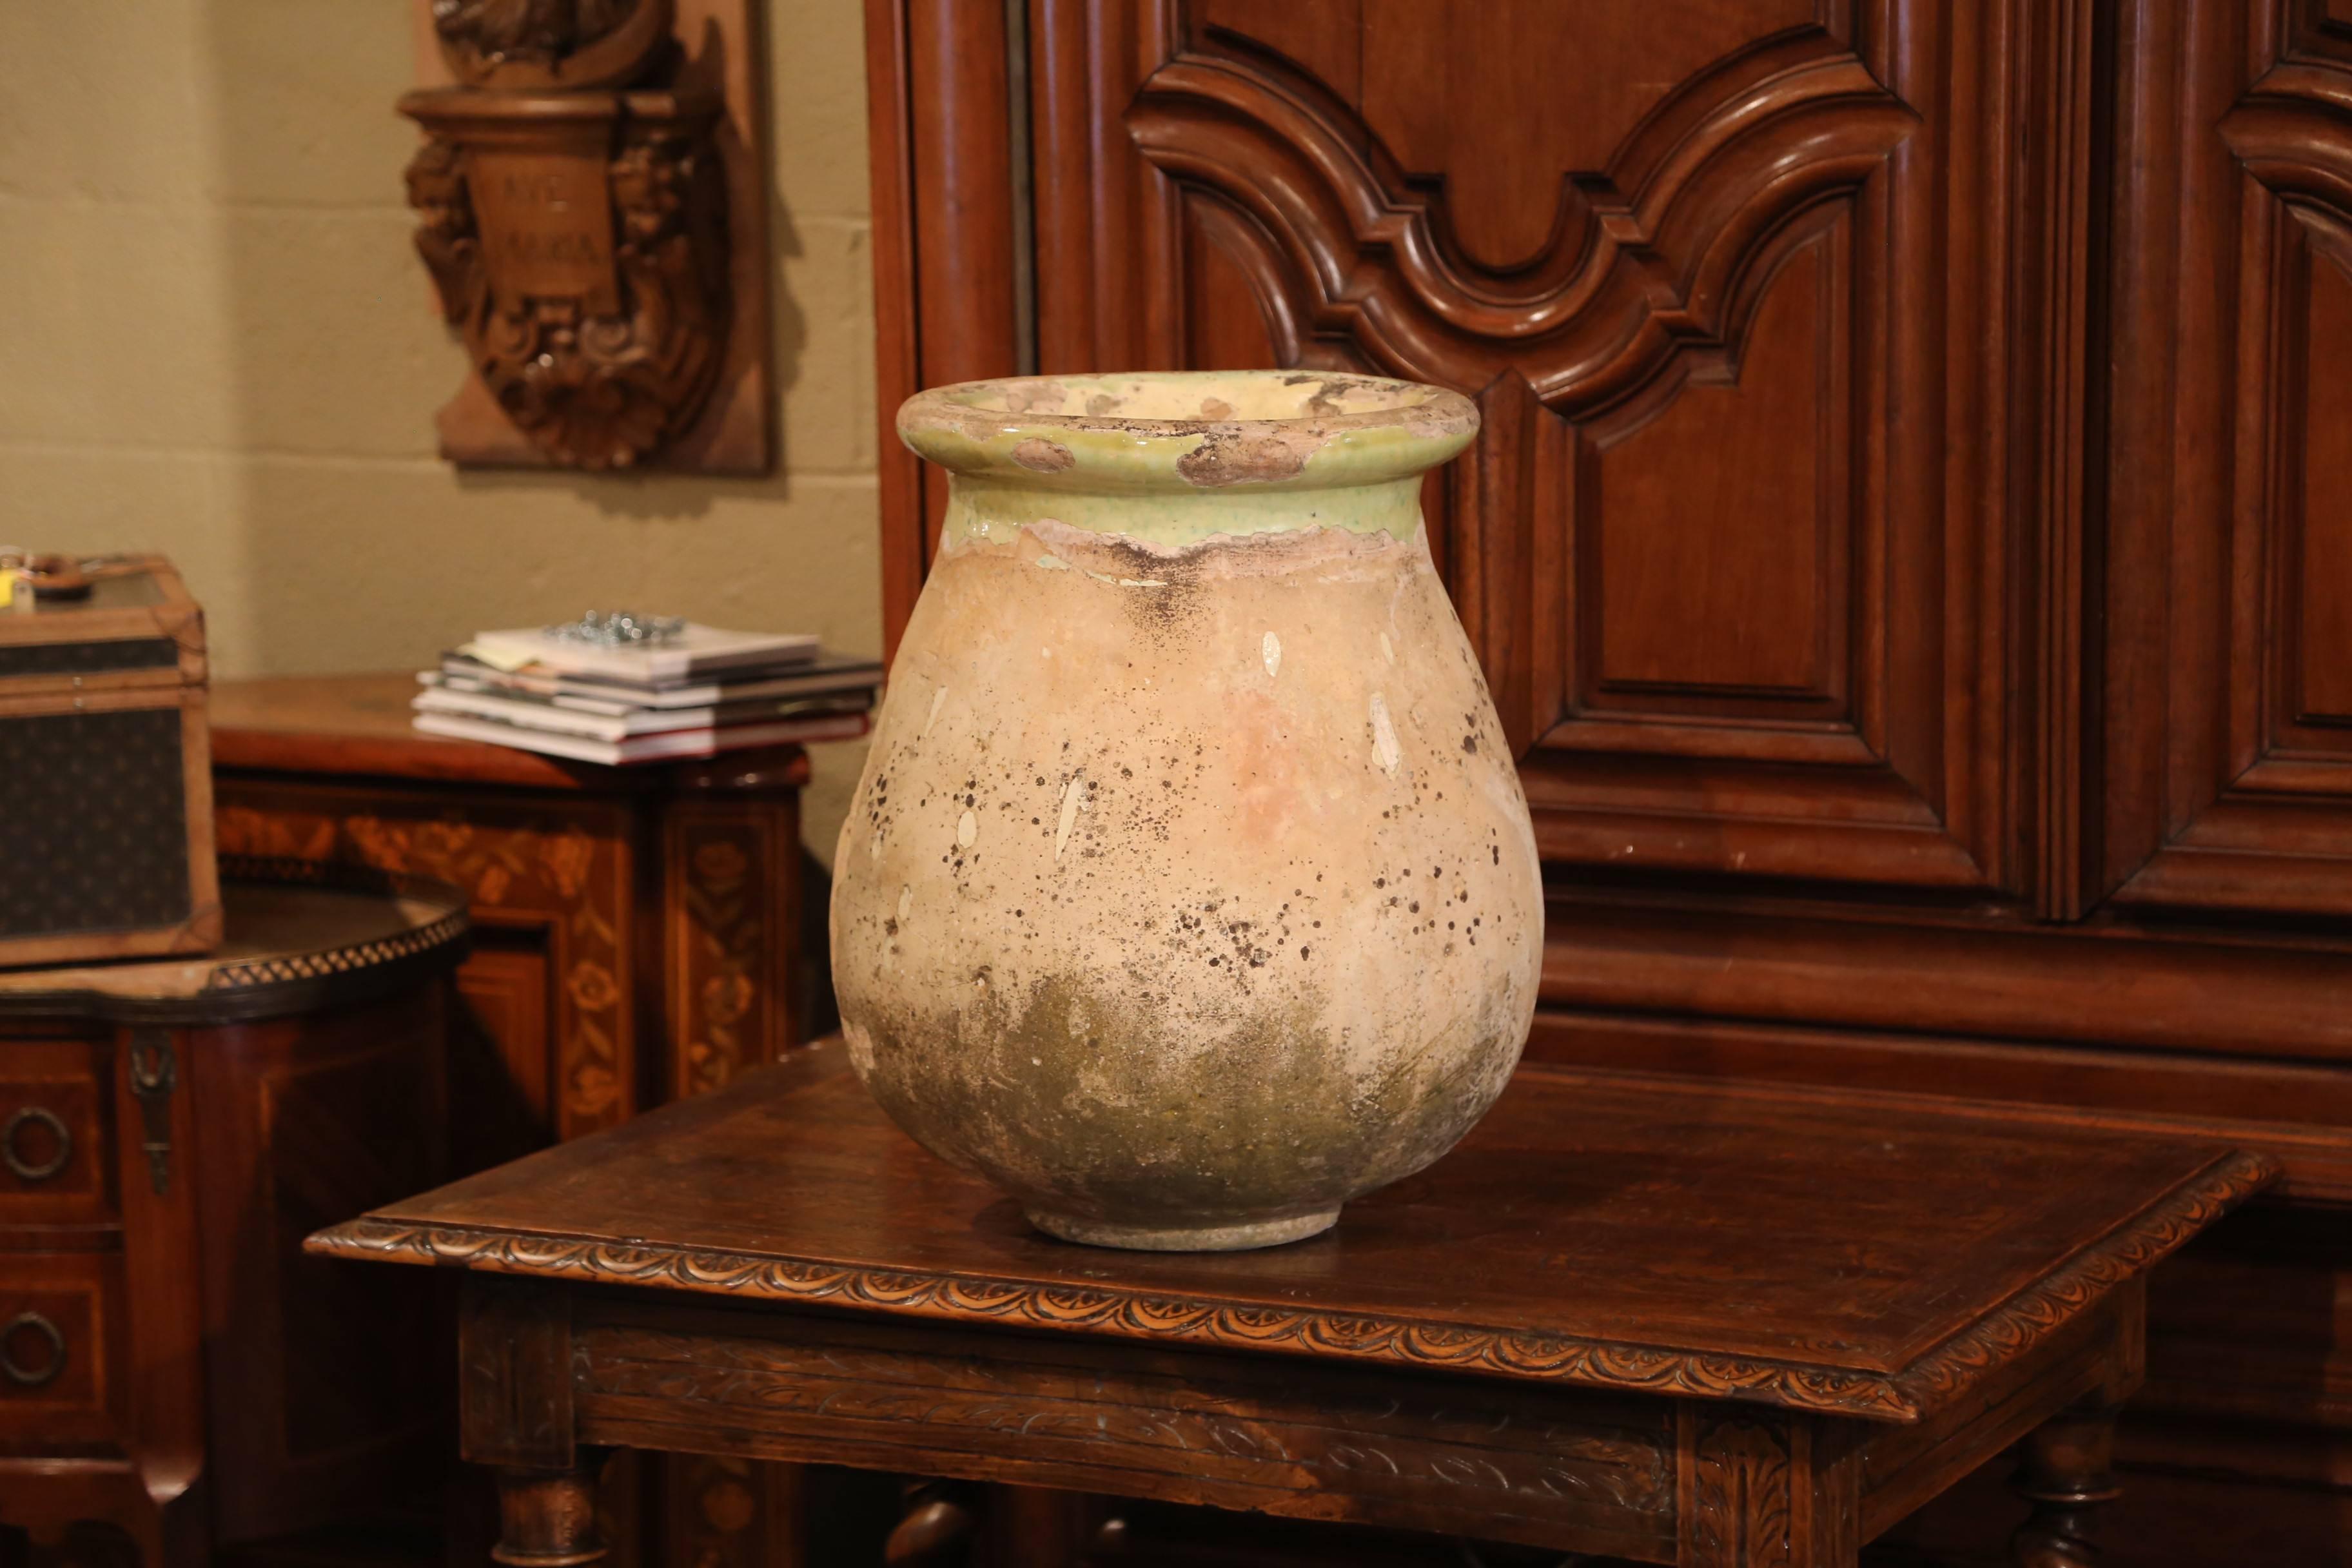 This antique earthenware olive jar was created in Southern France, circa 1860. Made of blond clay and neutral in color, the terracotta has a traditional round shape; the pot features a yellow glaze around the neck and trim, and a natural beige tone